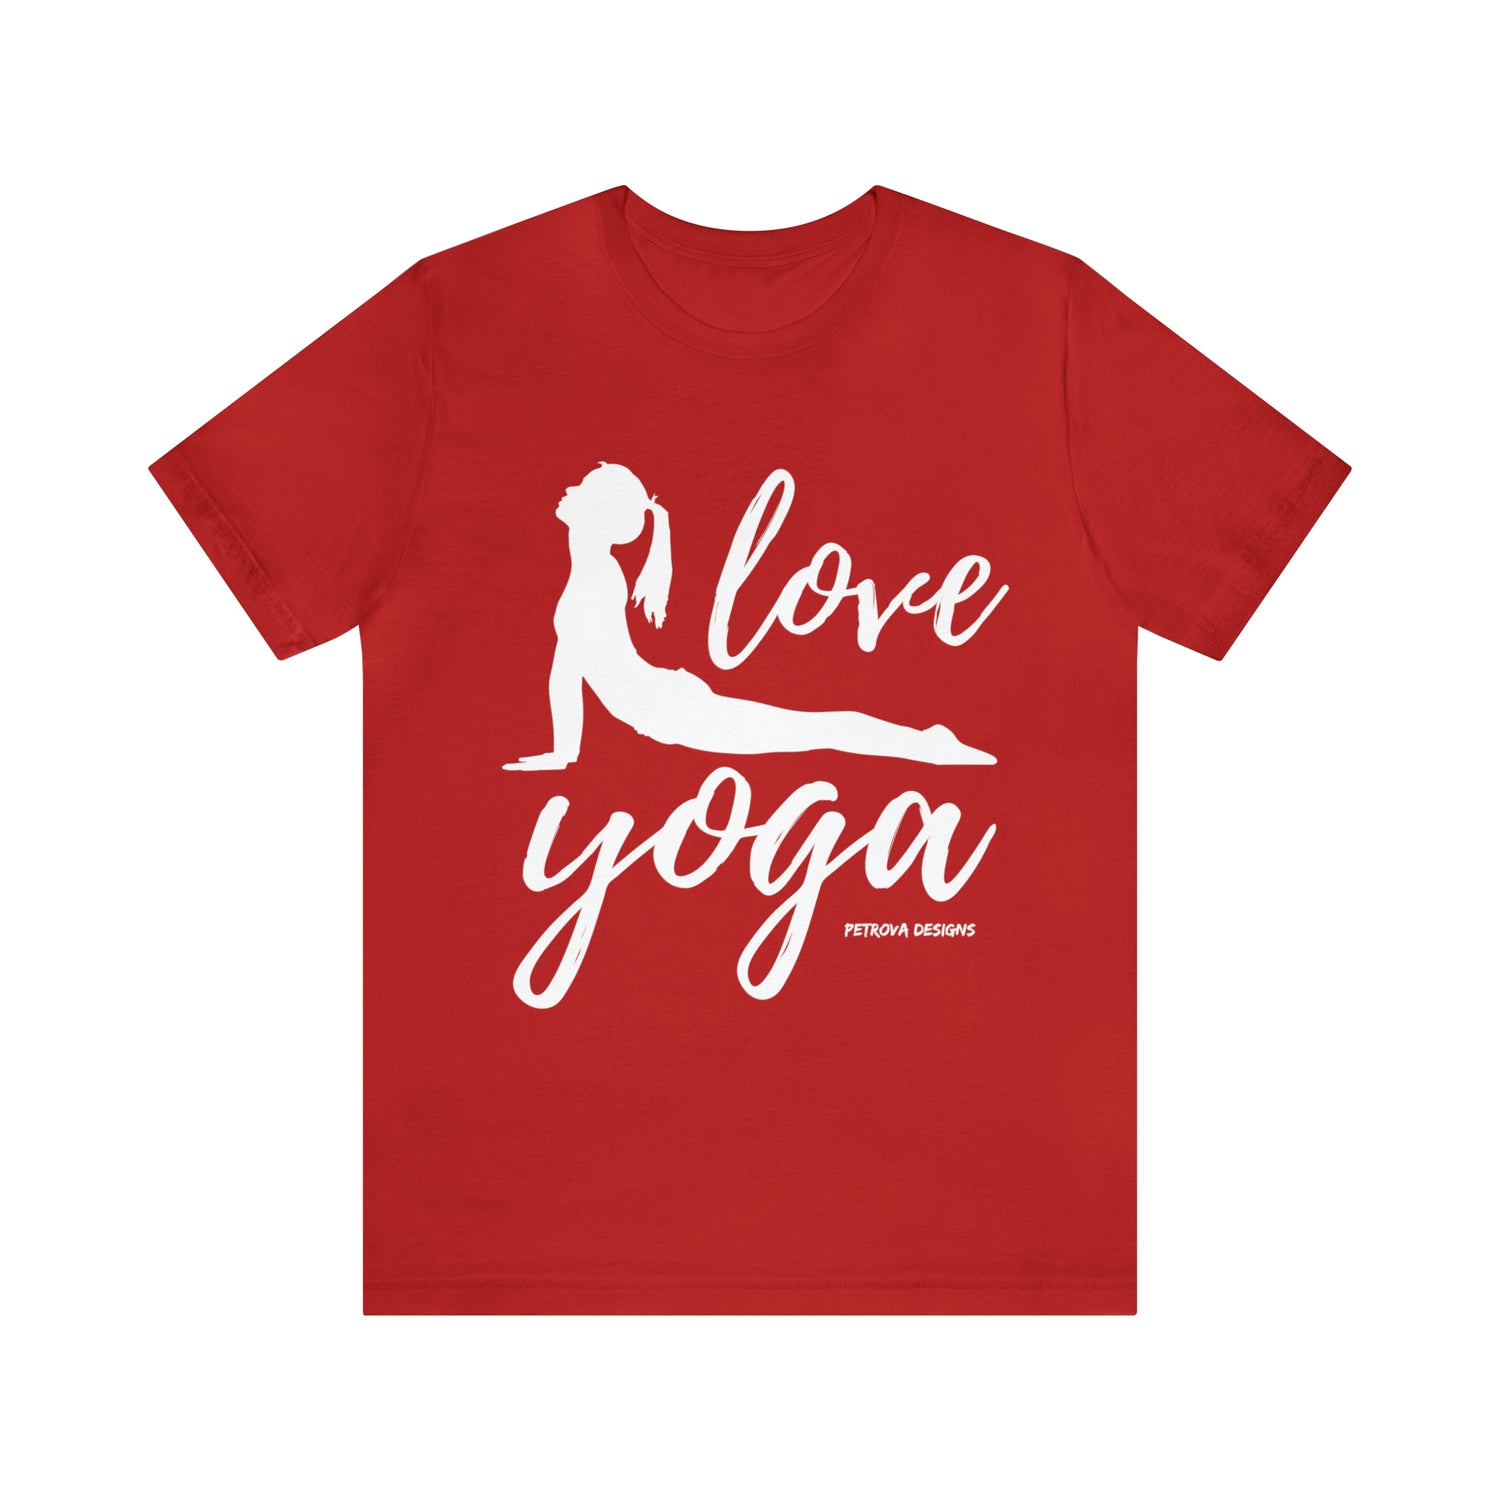 Red T-Shirt Tshirt Design Gift for Friend and Family Short Sleeved Shirt Yoga Petrova Designs